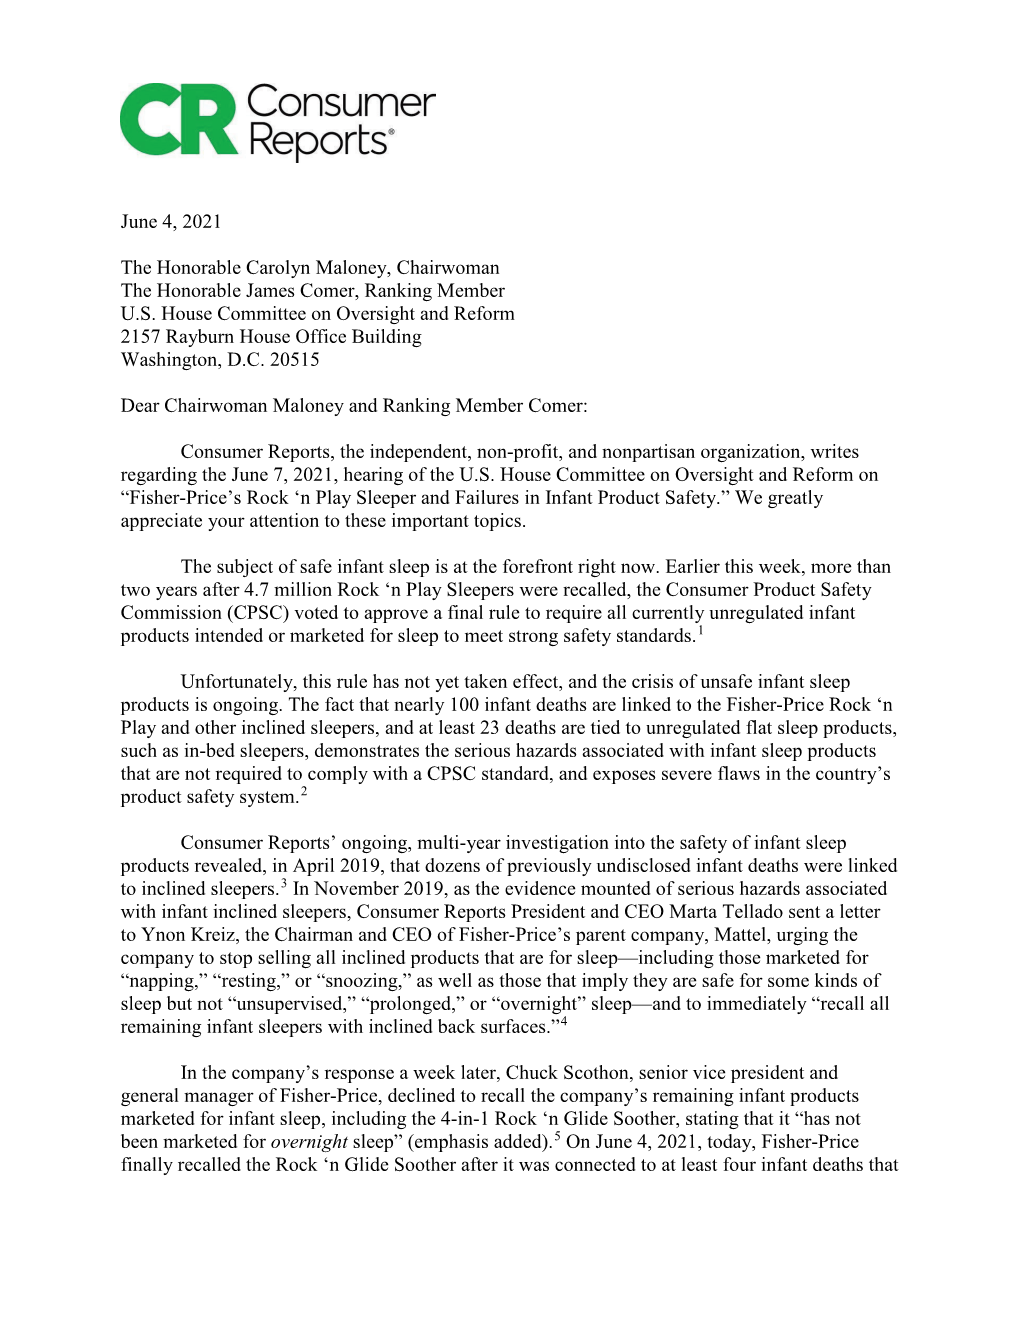 CR Letter to House Oversight Committee on Fisher-Price Product Safety Hearing 6-4-2021 616.0